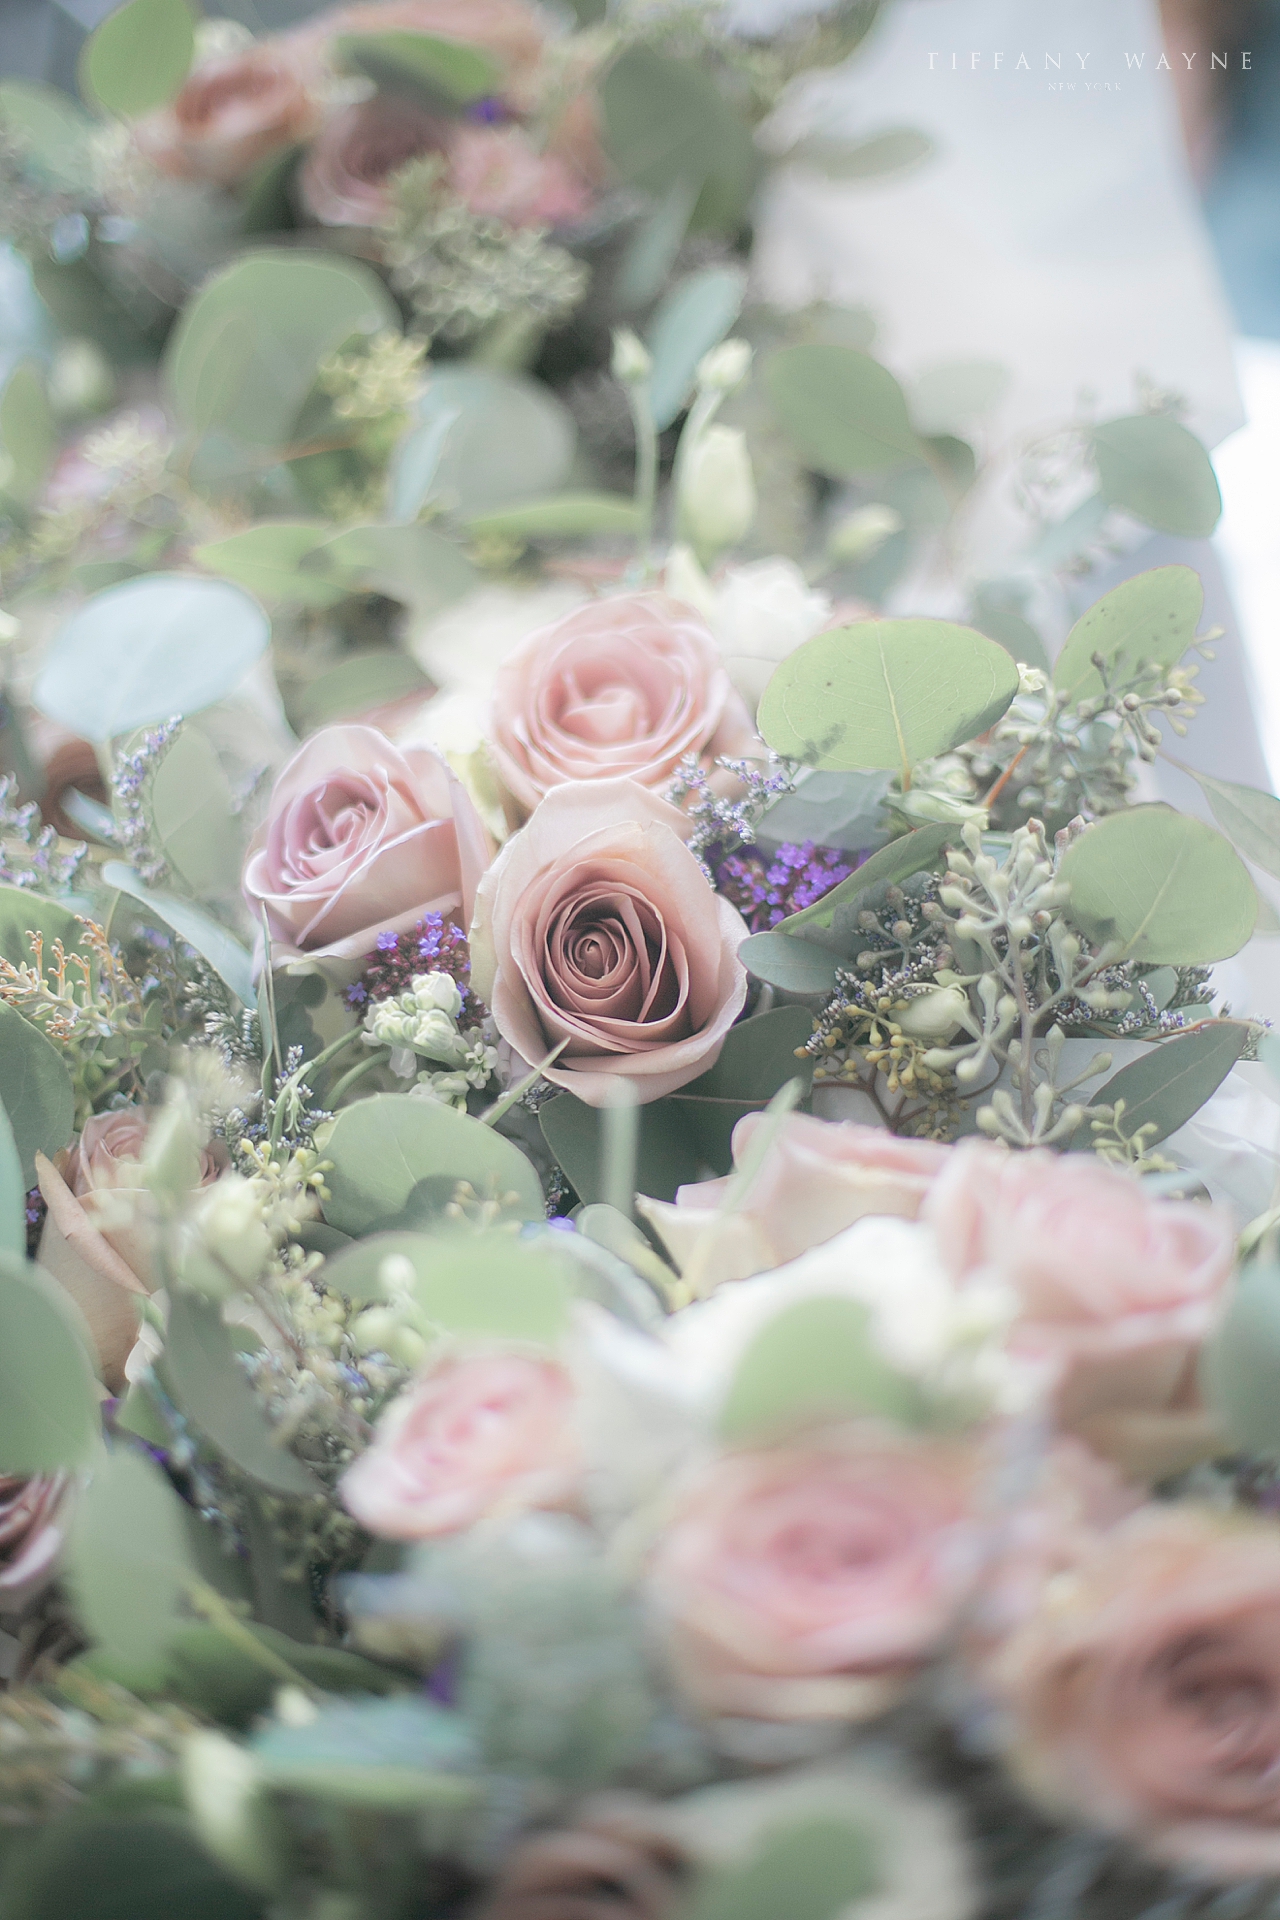 Michele's Florist creates blush pink and green wedding bouquets photographed by New York wedding photographer Tiffany Wayne